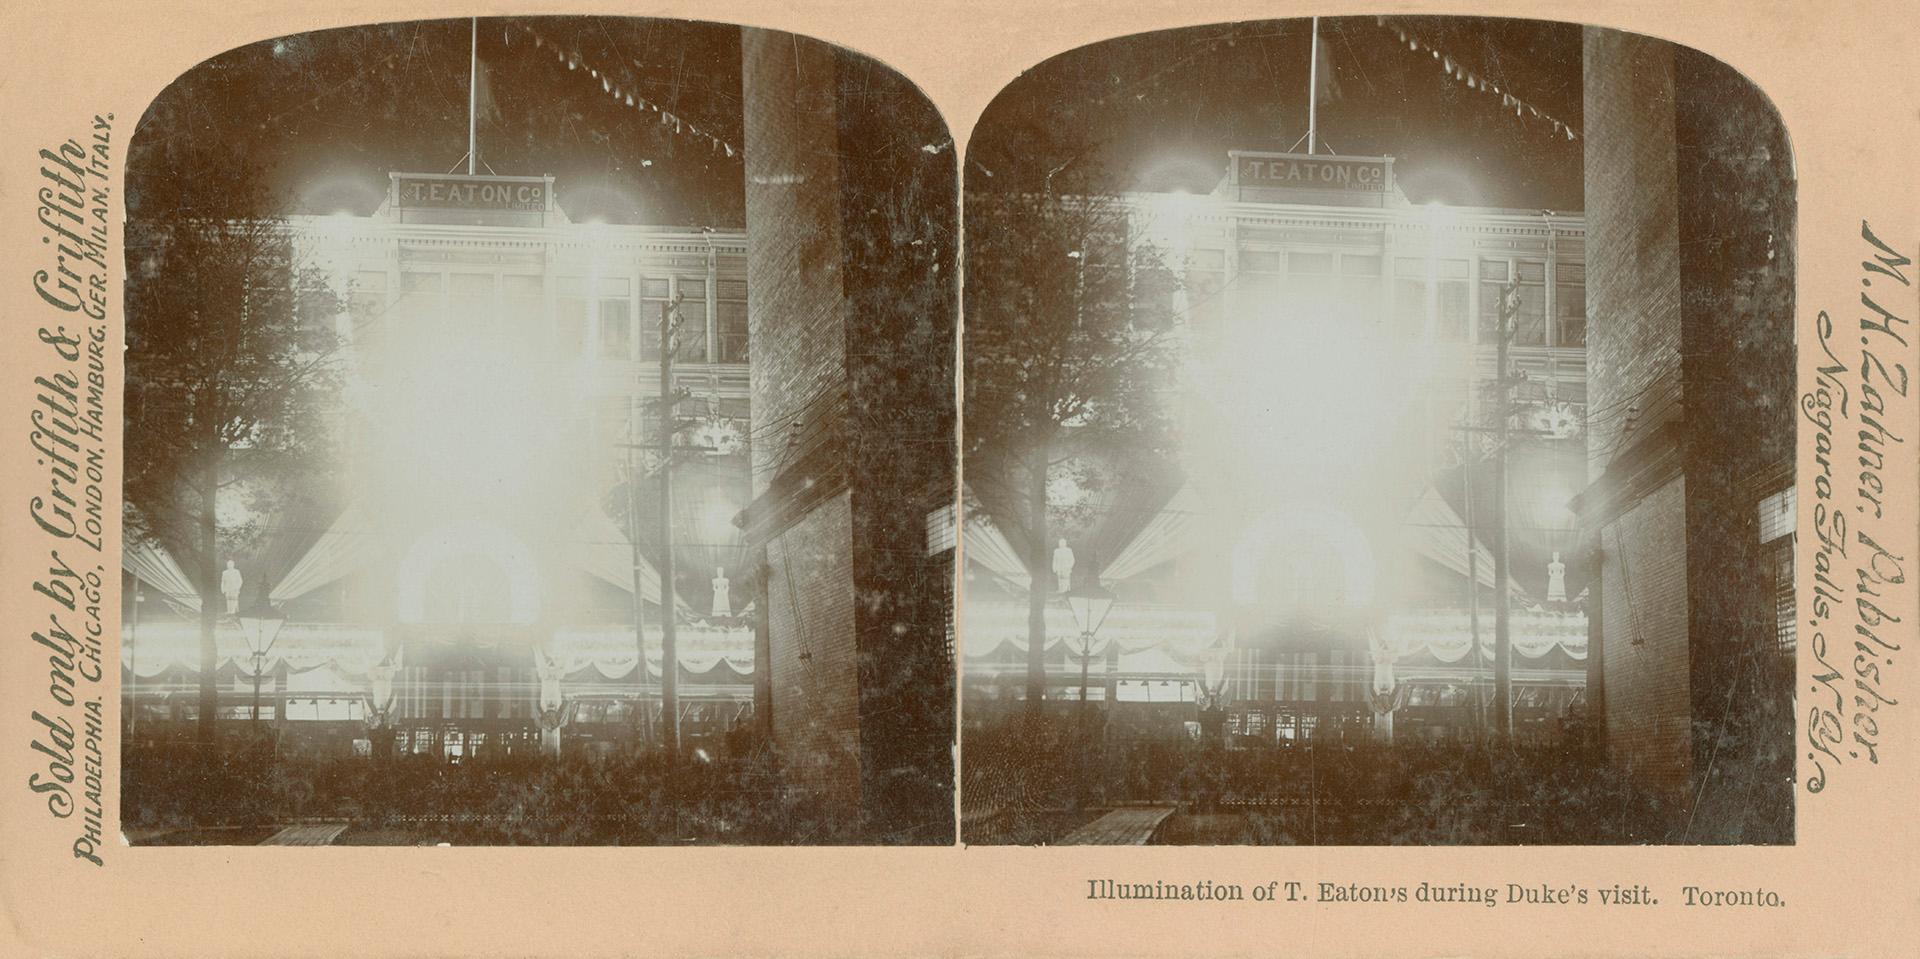 Pictures show bright lights in front of a large department store.